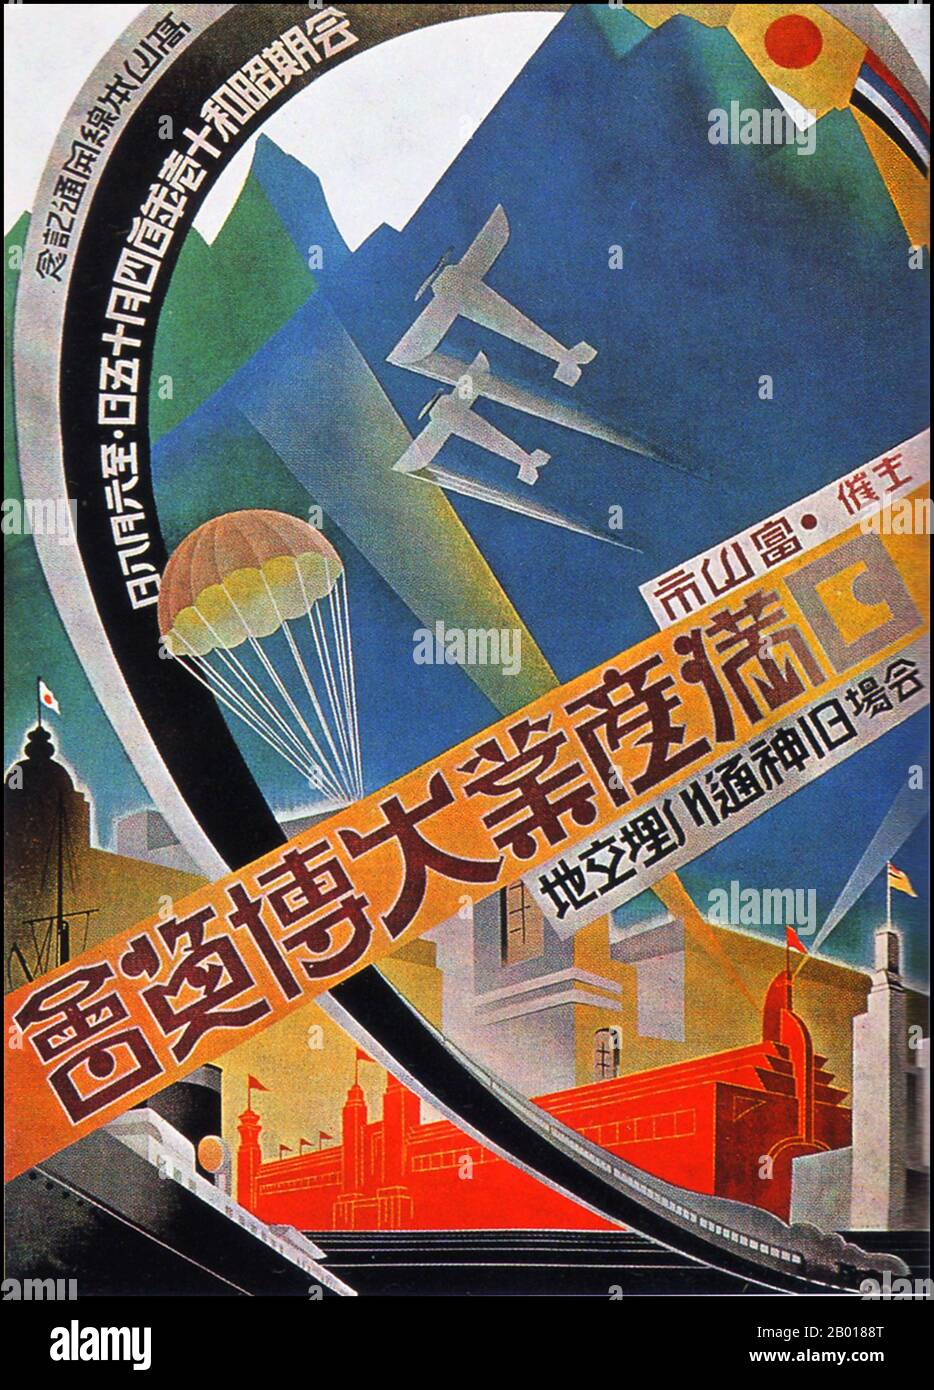 Japan: Japan-Manchuria Industrial Exhibition, Toyama, 1936.  Exposition poster art in Japan between approximately 1925 and 1941 mirrors the rapid militarisation of society and the growth of militarism, statism and fascism during the Showa Era.  In the 1920s expo poster art features elements of modern art and even Art Deco. Themes are whimsical and outward looking, representing Japan's growing importance and influence in the world of international commerce and art. By the 1930s this kind of poster art had grown much more bleak, less concerned with human themes and more directed towards statism. Stock Photo